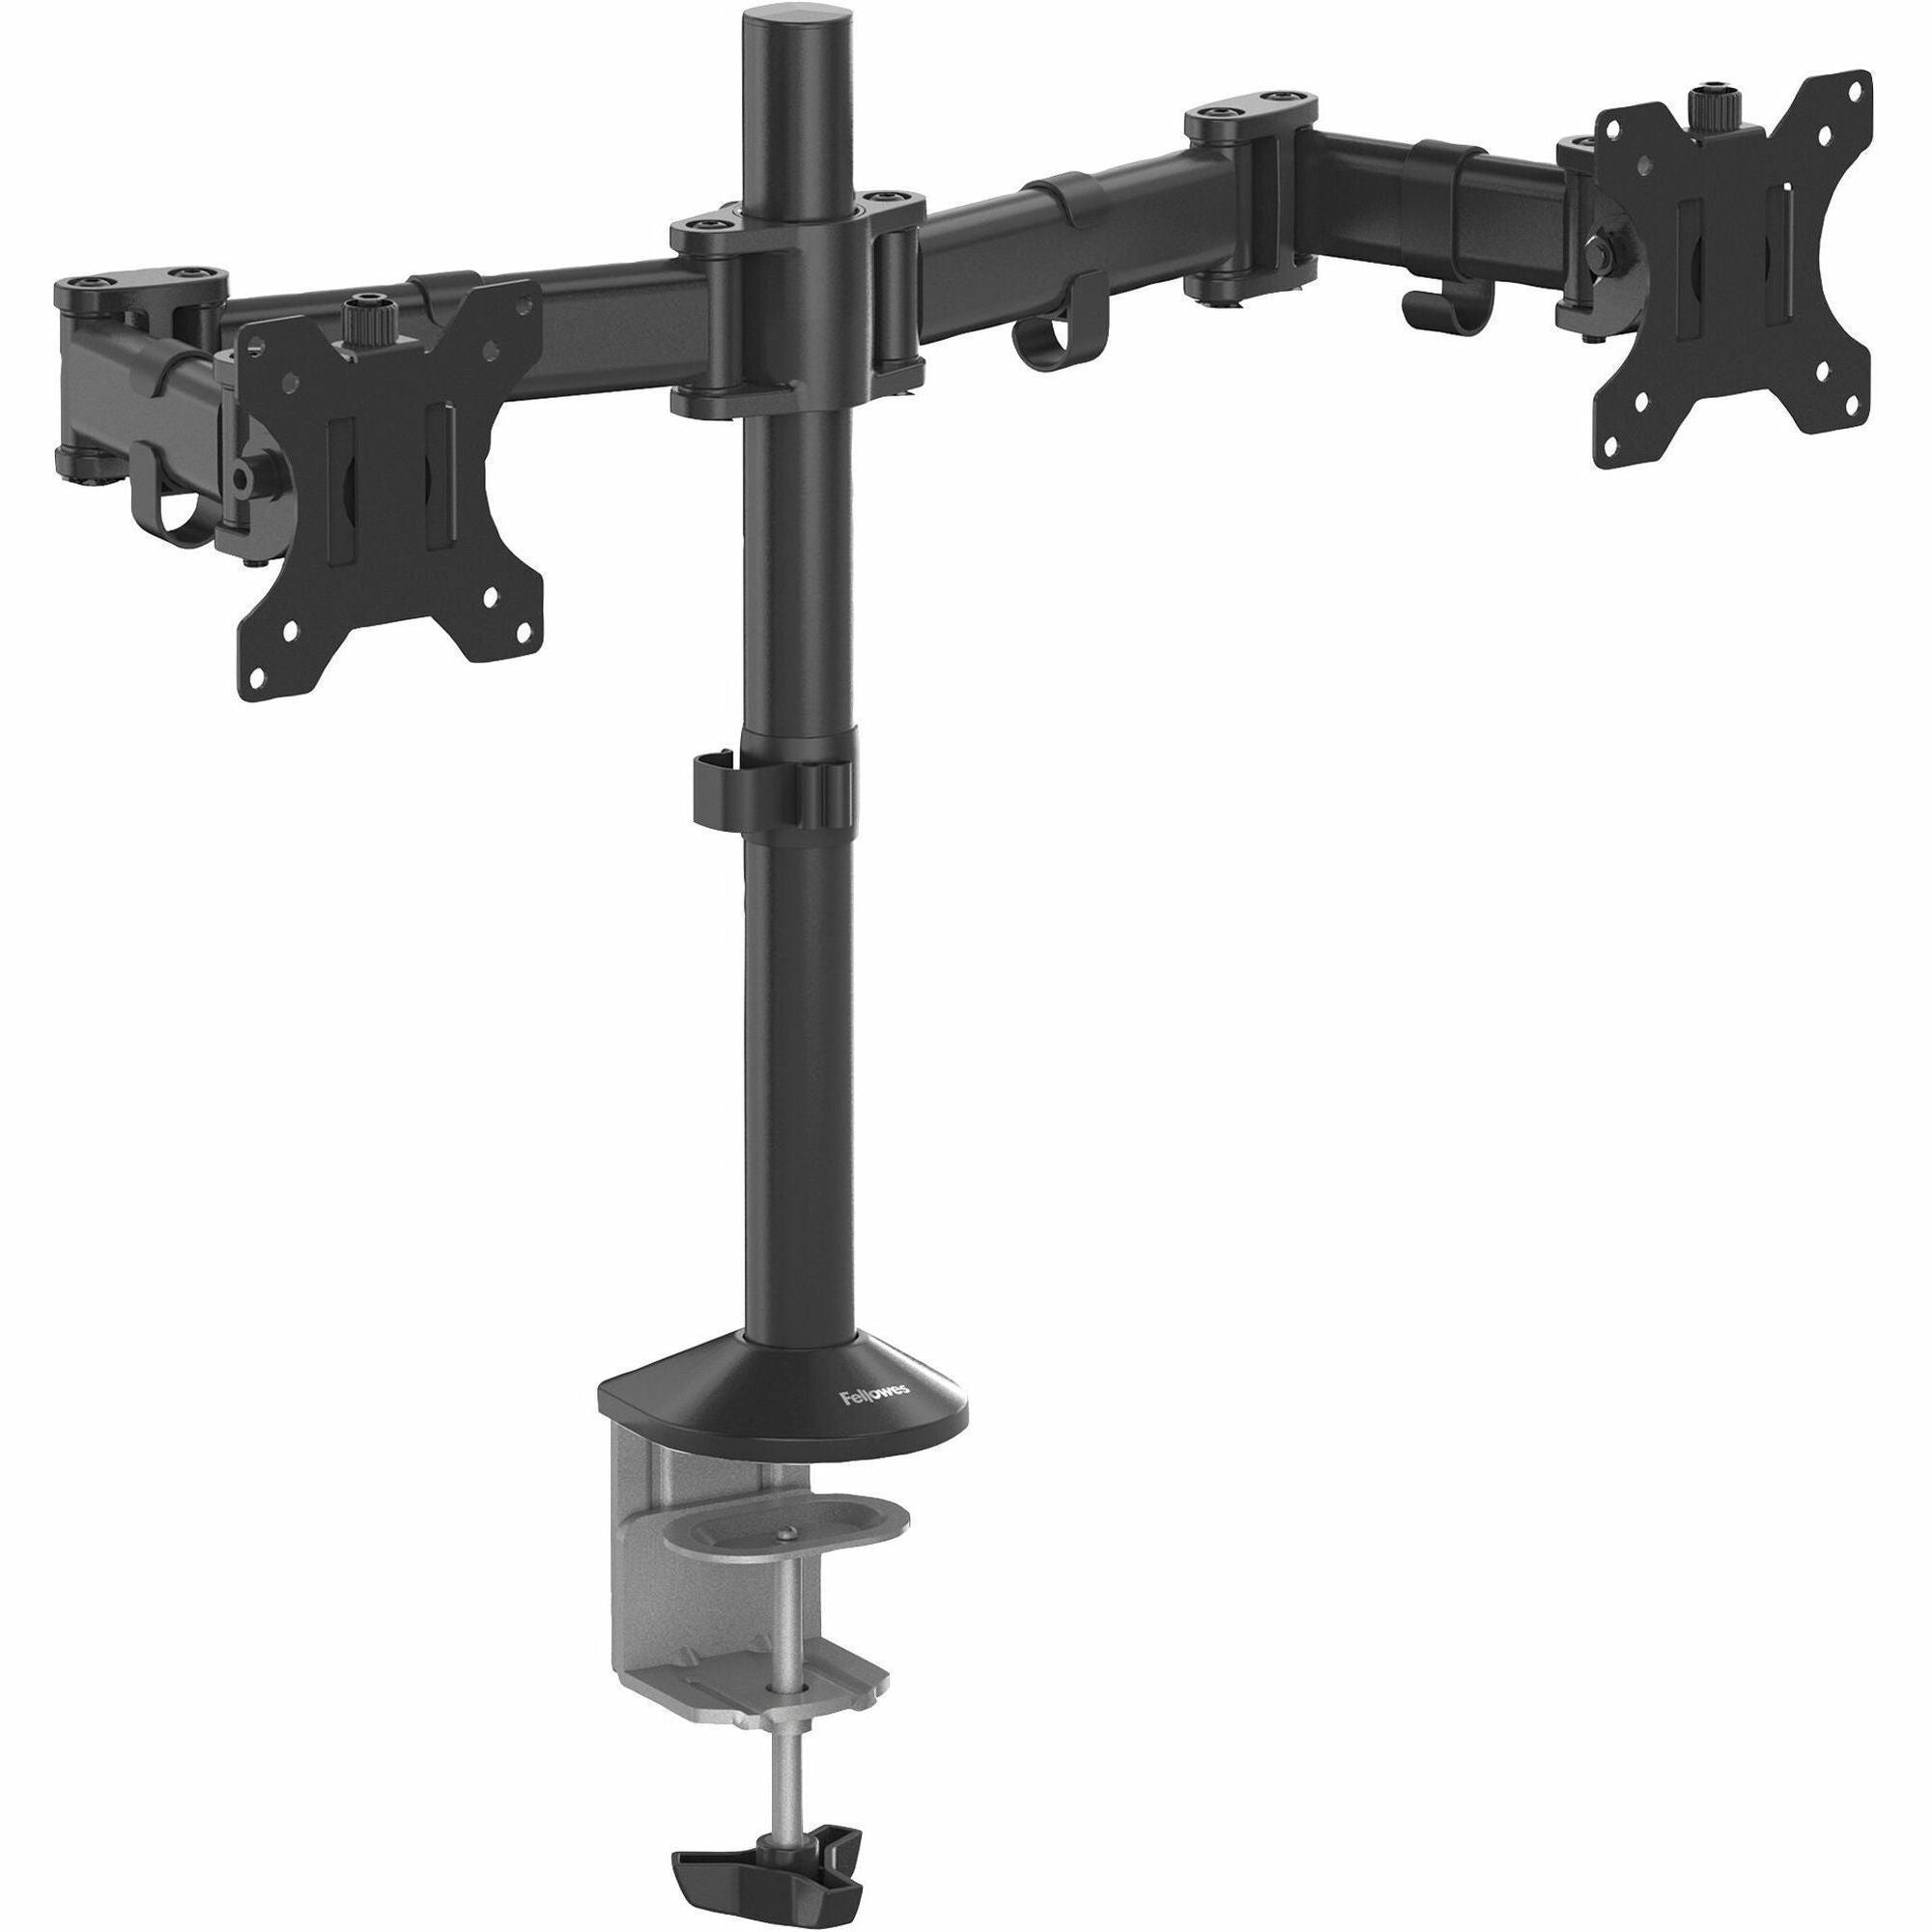 fellowes-reflex-dual-monitor-arm-2-displays-supported-30-screen-support-48-lb-load-capacity_fel8502601 - 1